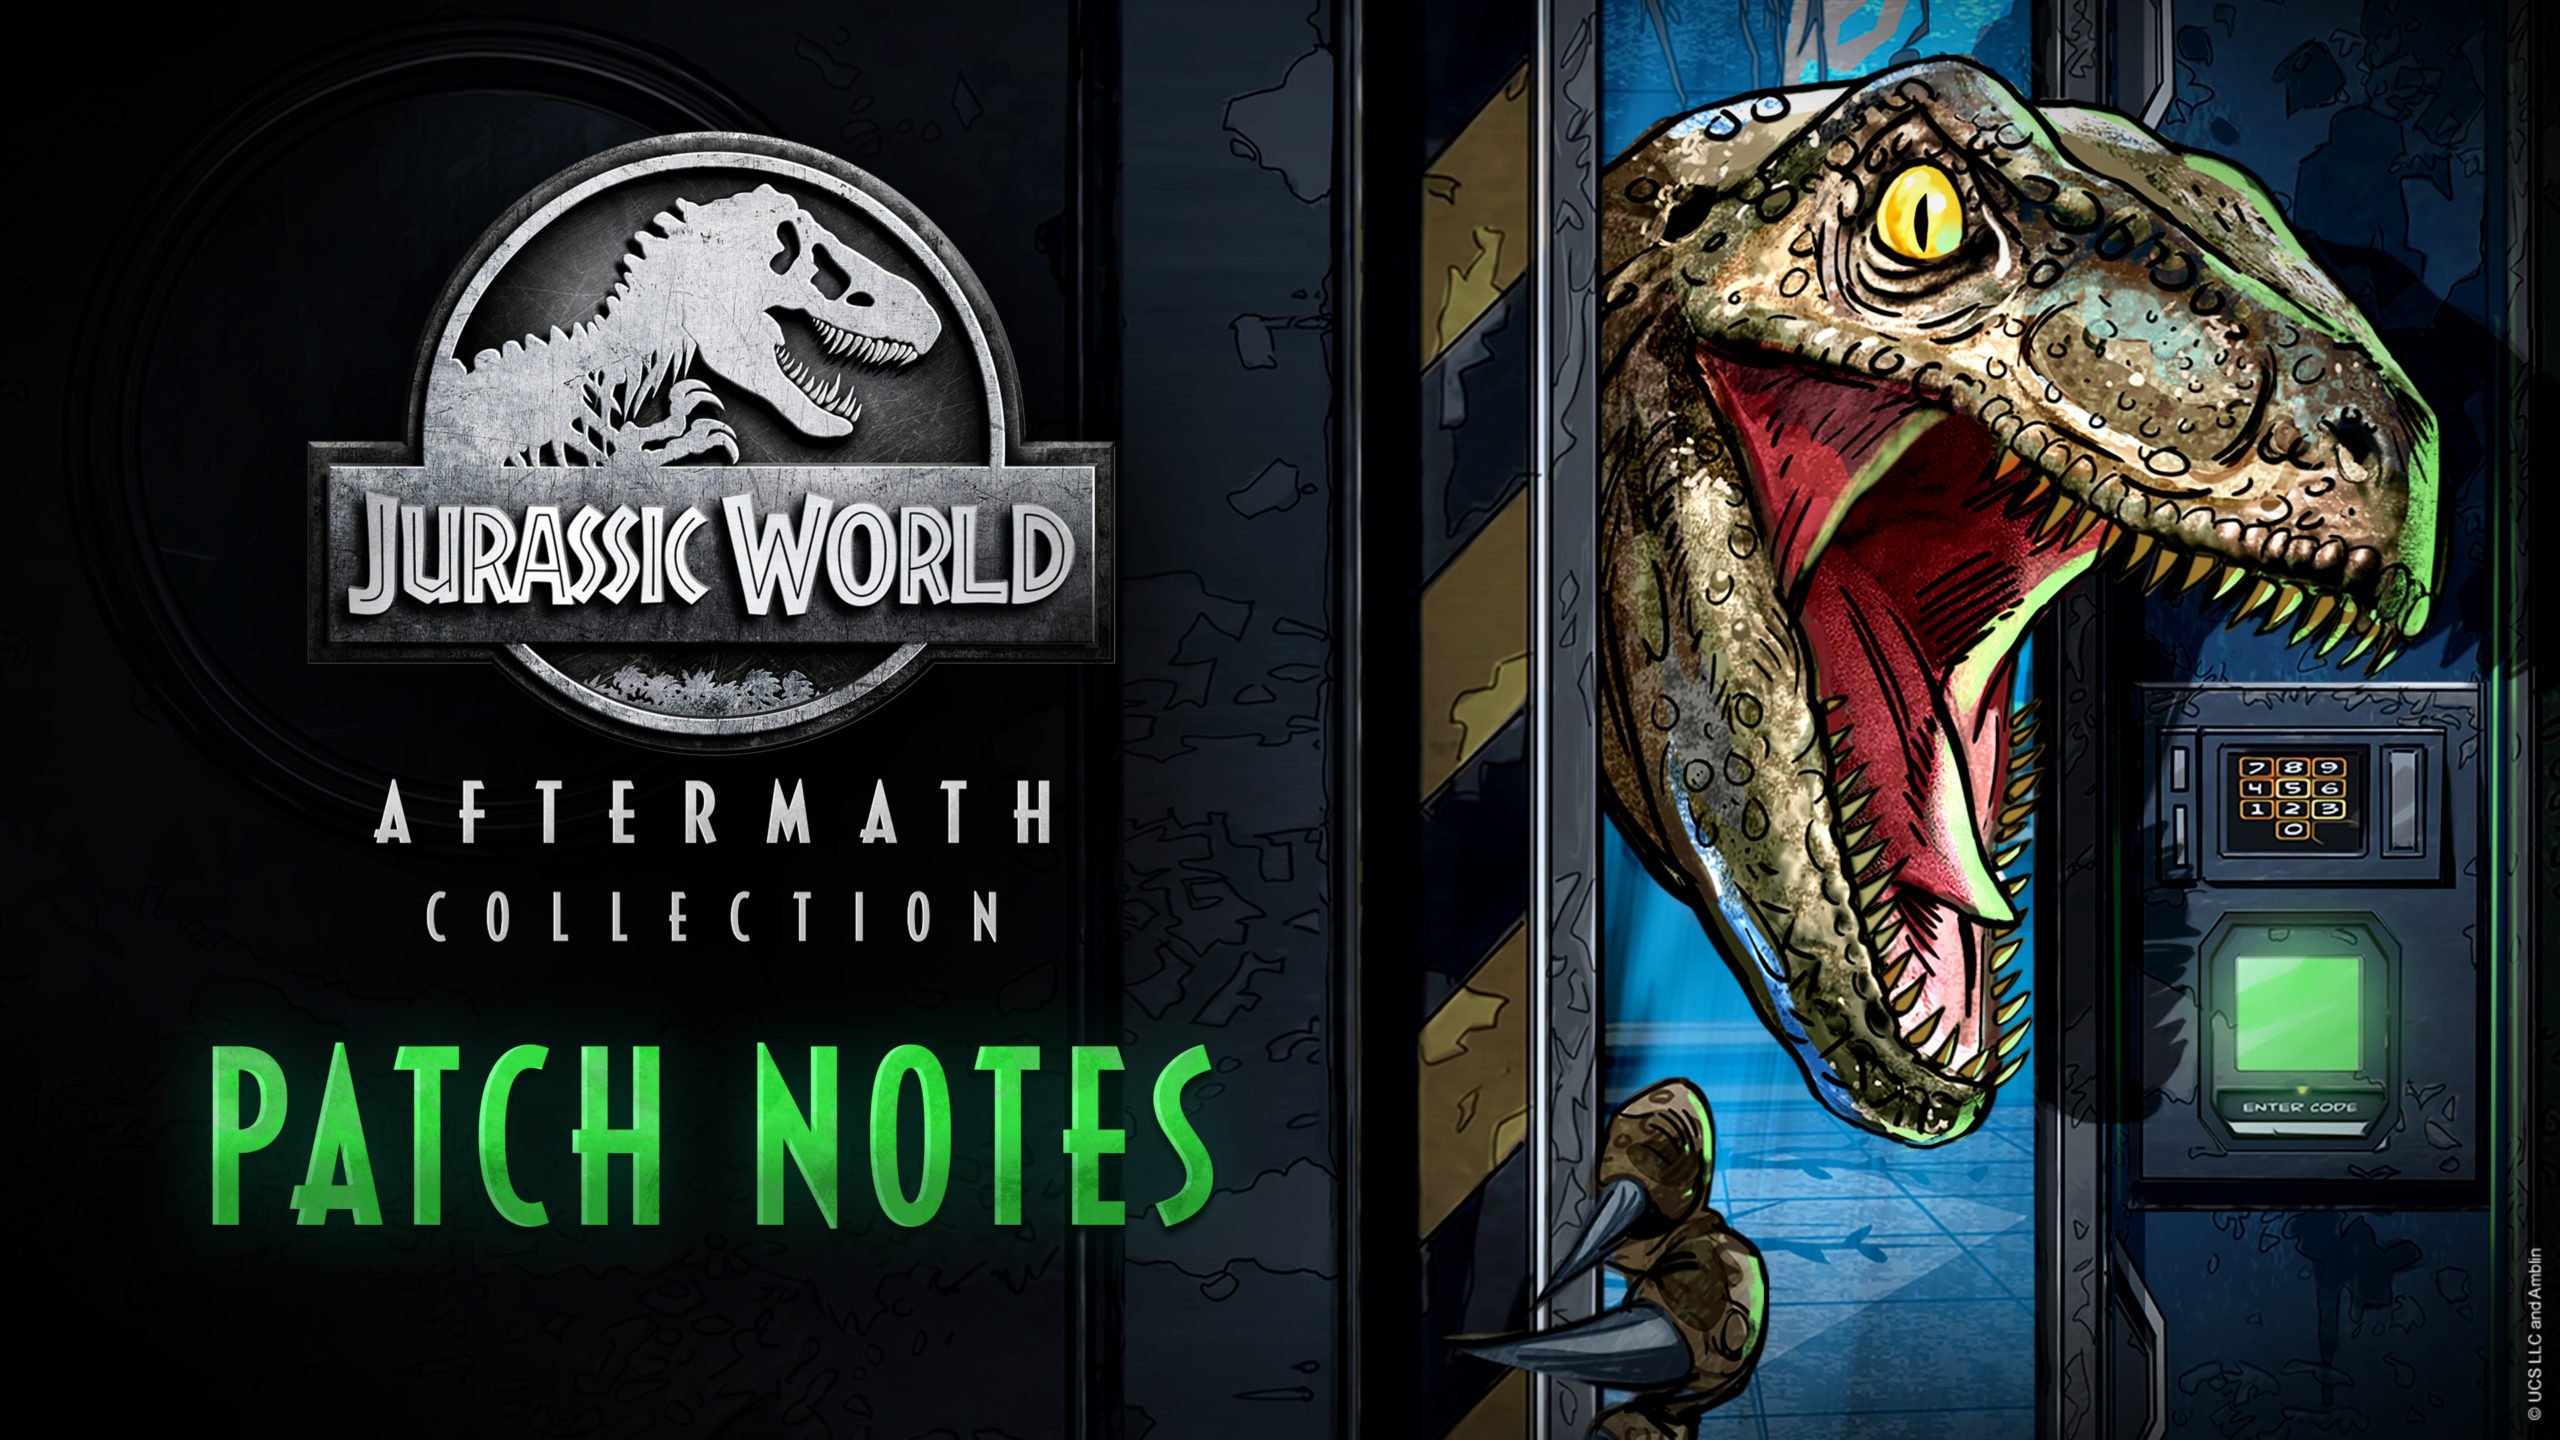 Satisfy Your Lust for All Things Dinosaurs with Jurassic World Aftermath Galery!